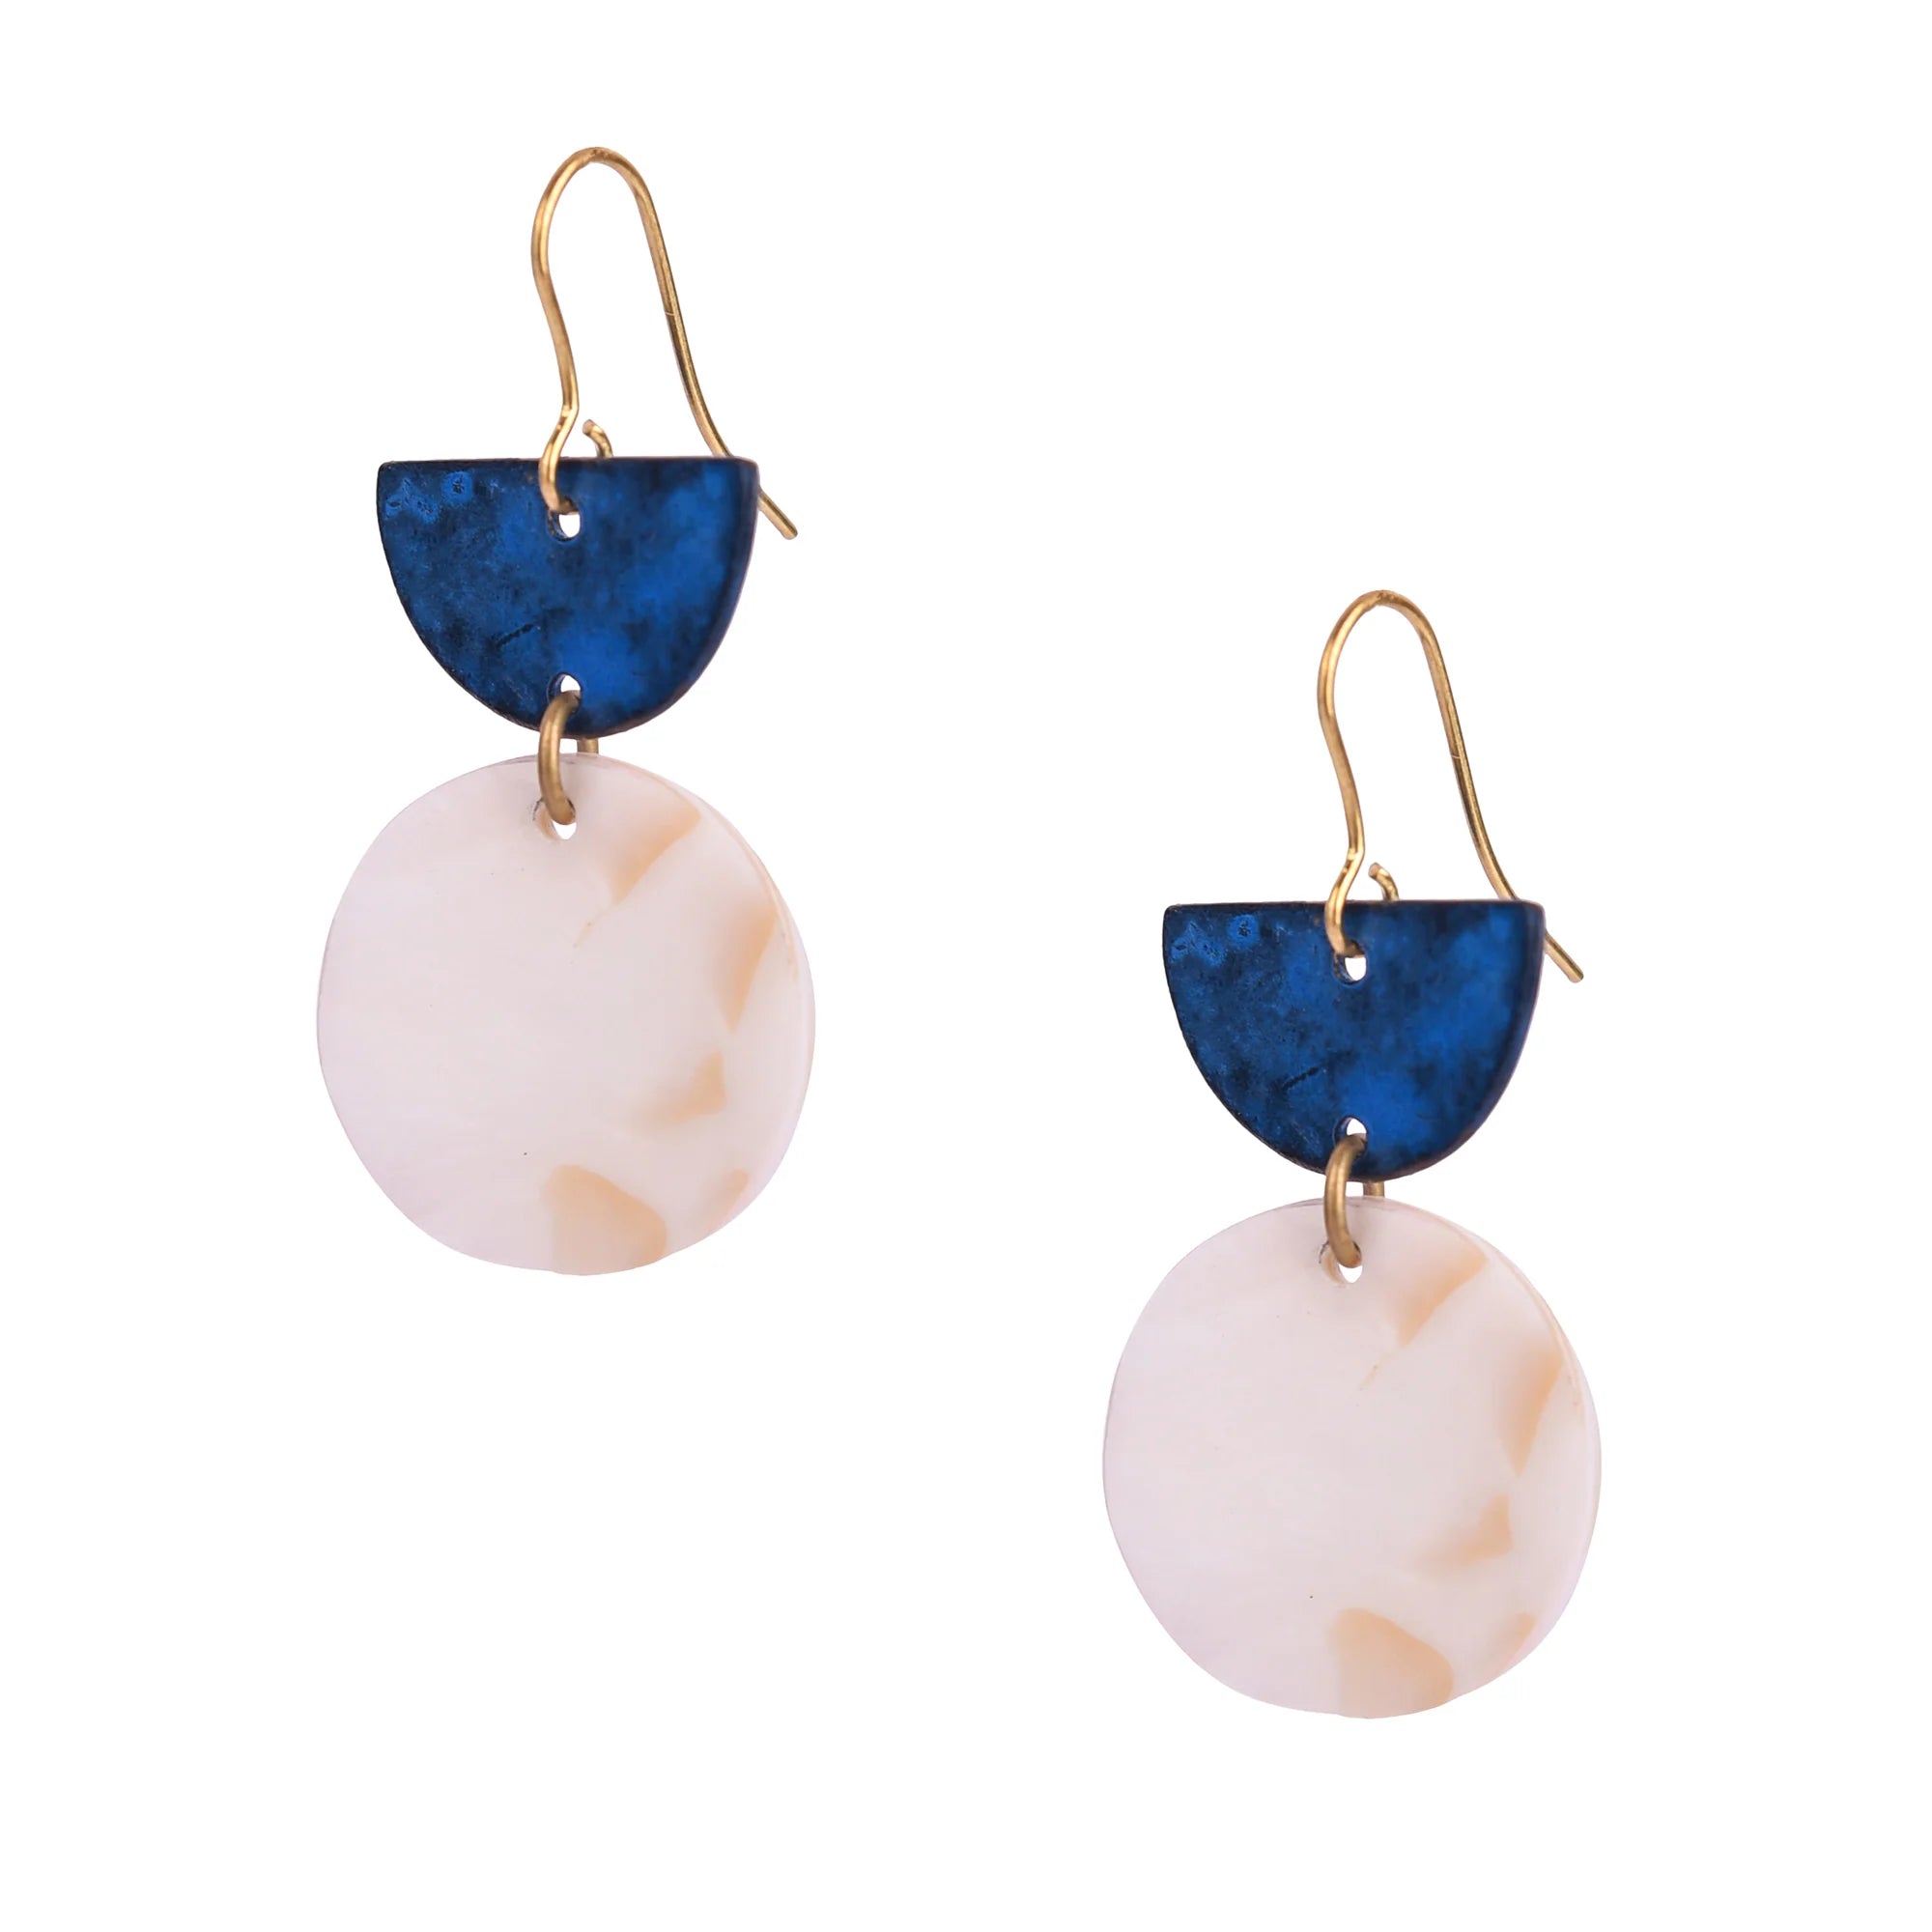 Earrings white background. Earrings are two shapes attached to each other. The top shape is a semi circle in electric blue. The bottom is a circle made out of Mother of Pearl.